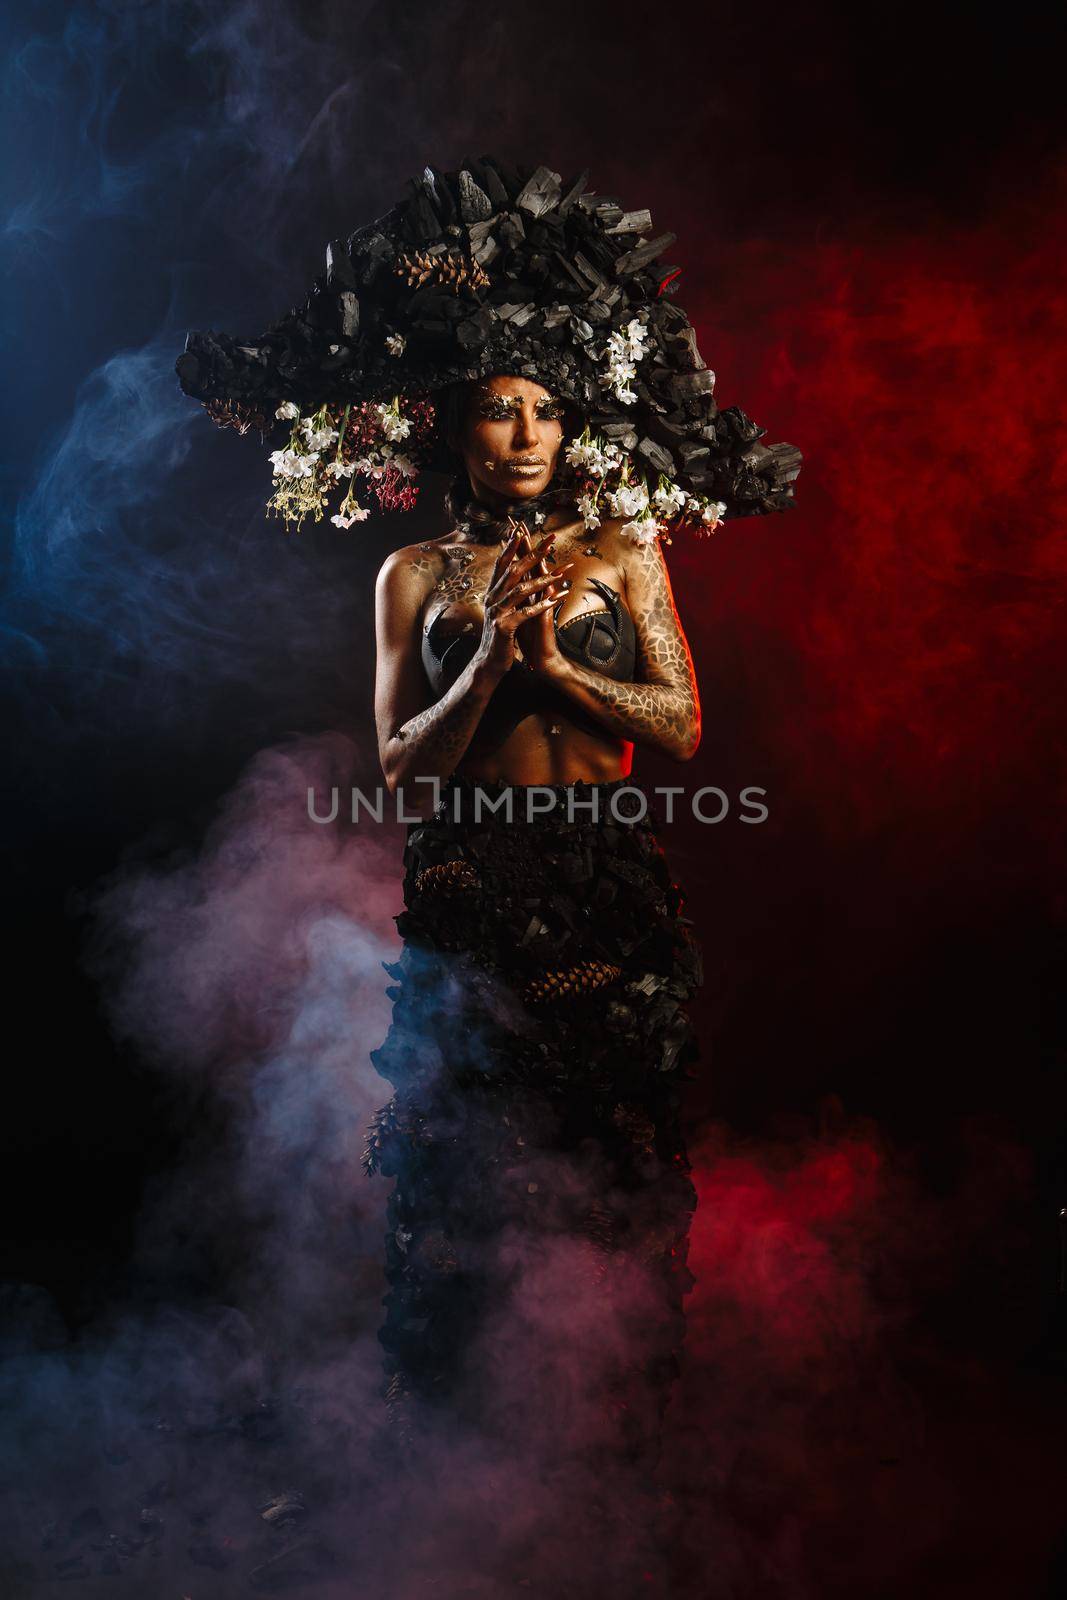 Portrait of a model in a headdress and dress made of coal. There is red smoke behind the model.